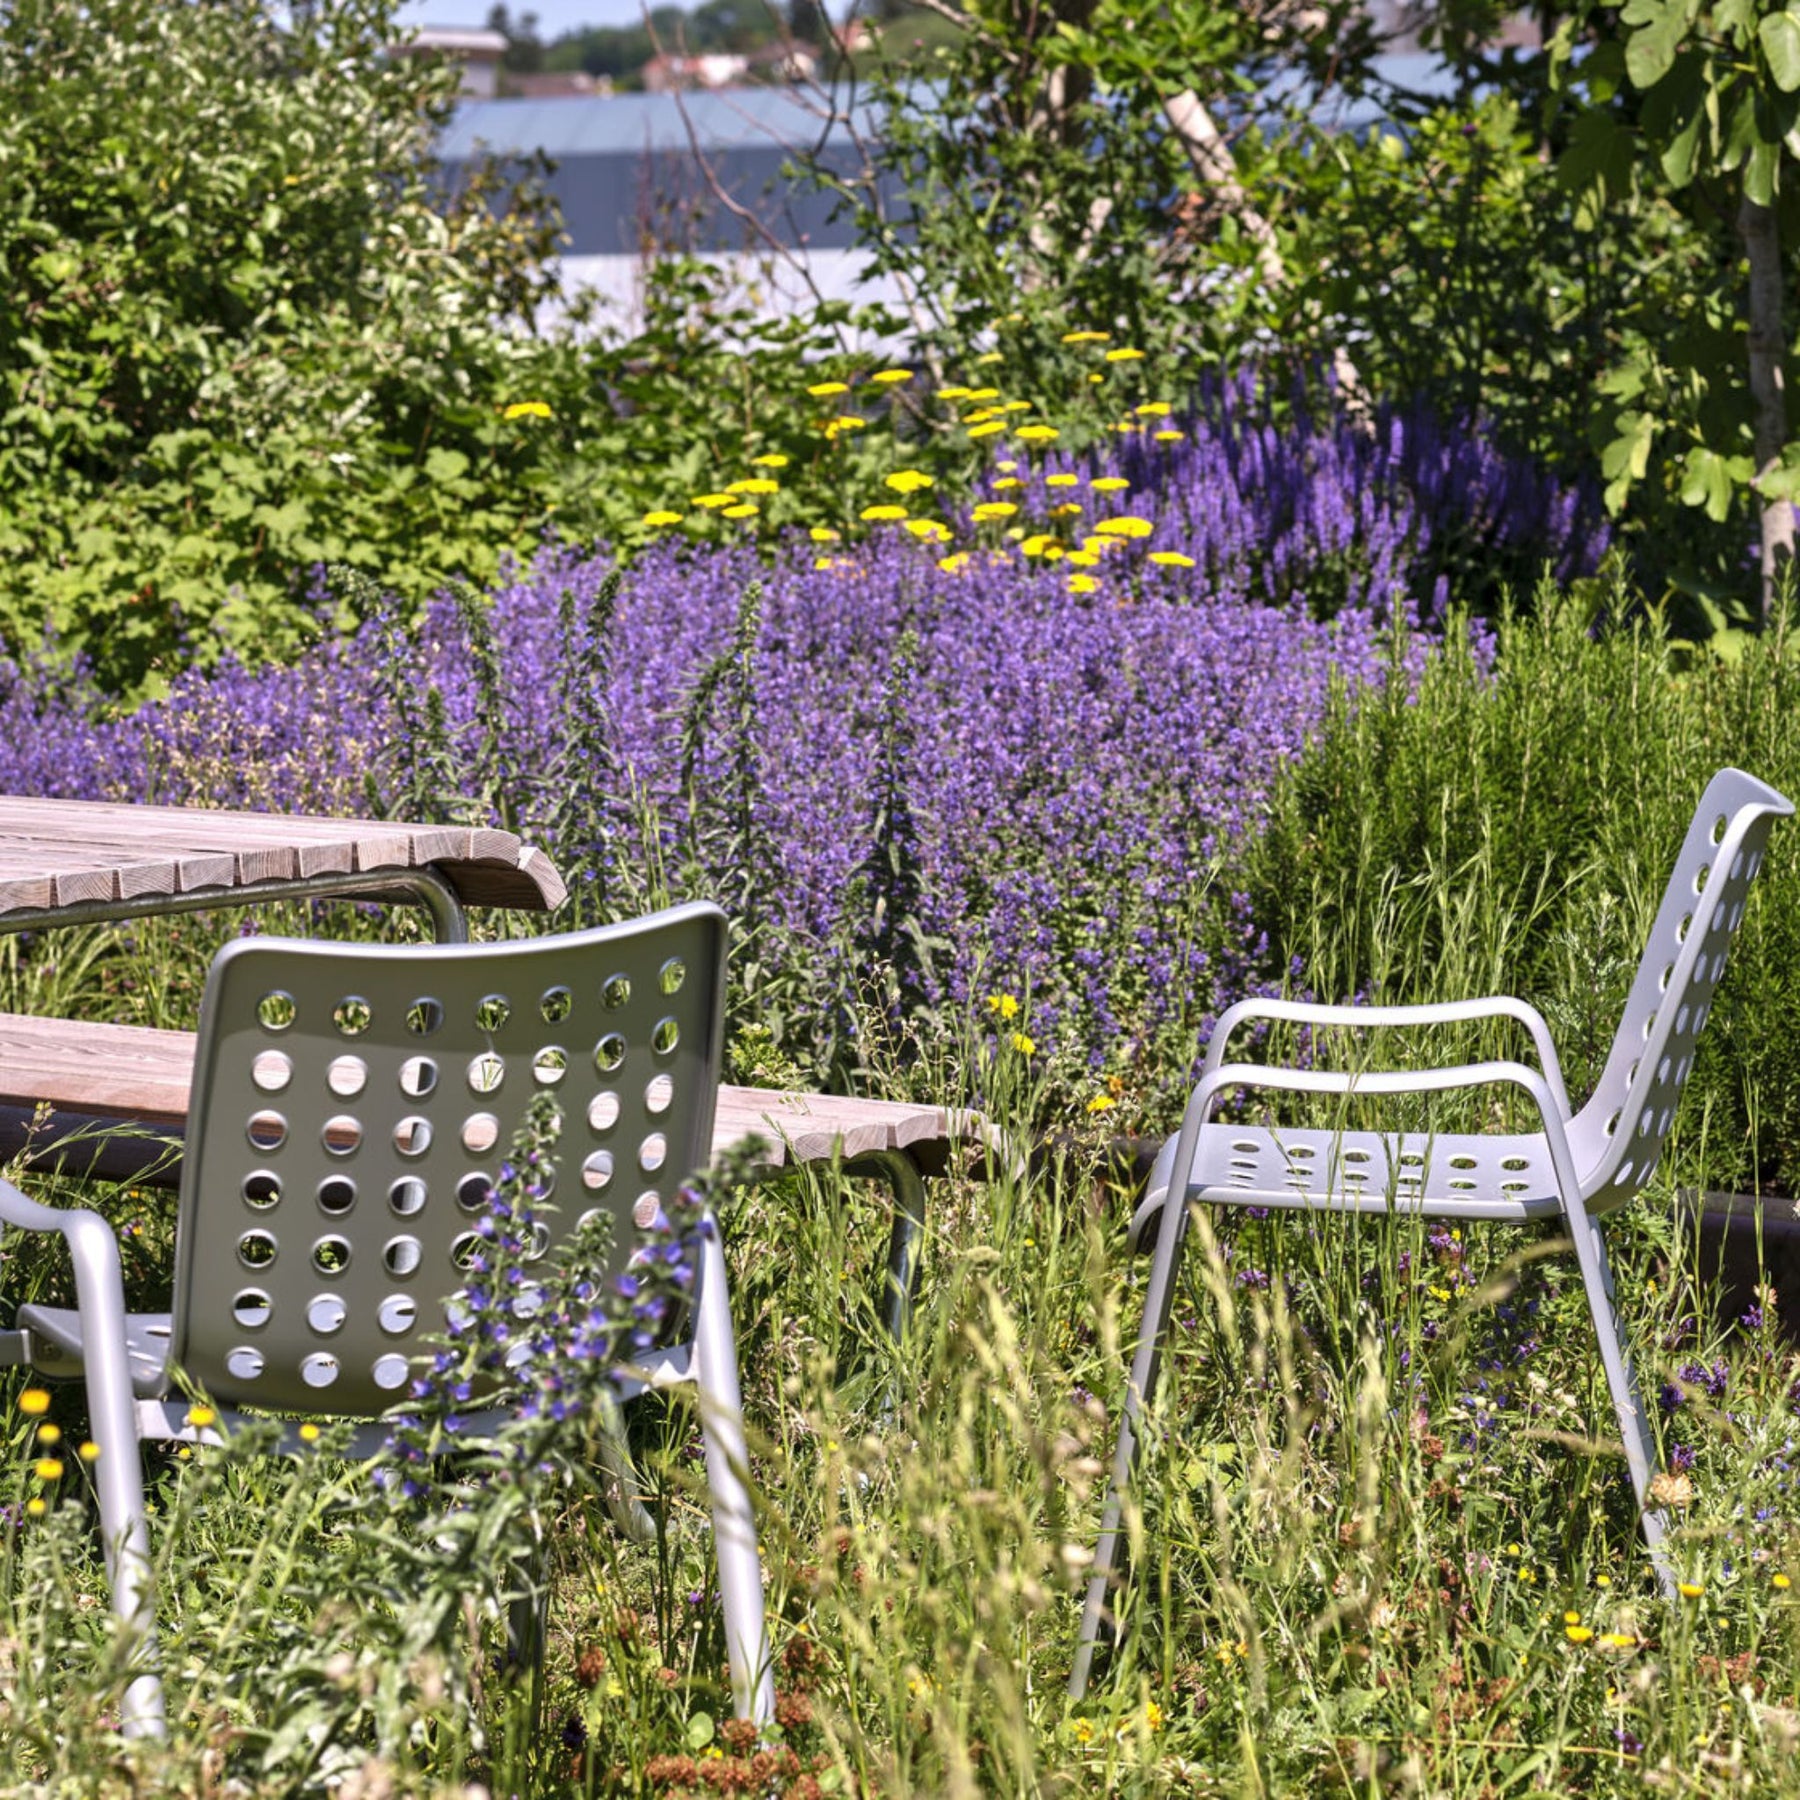 Vitra Landi Chairs by Hans Coray in Outdoor City Garden with Purple Flowers